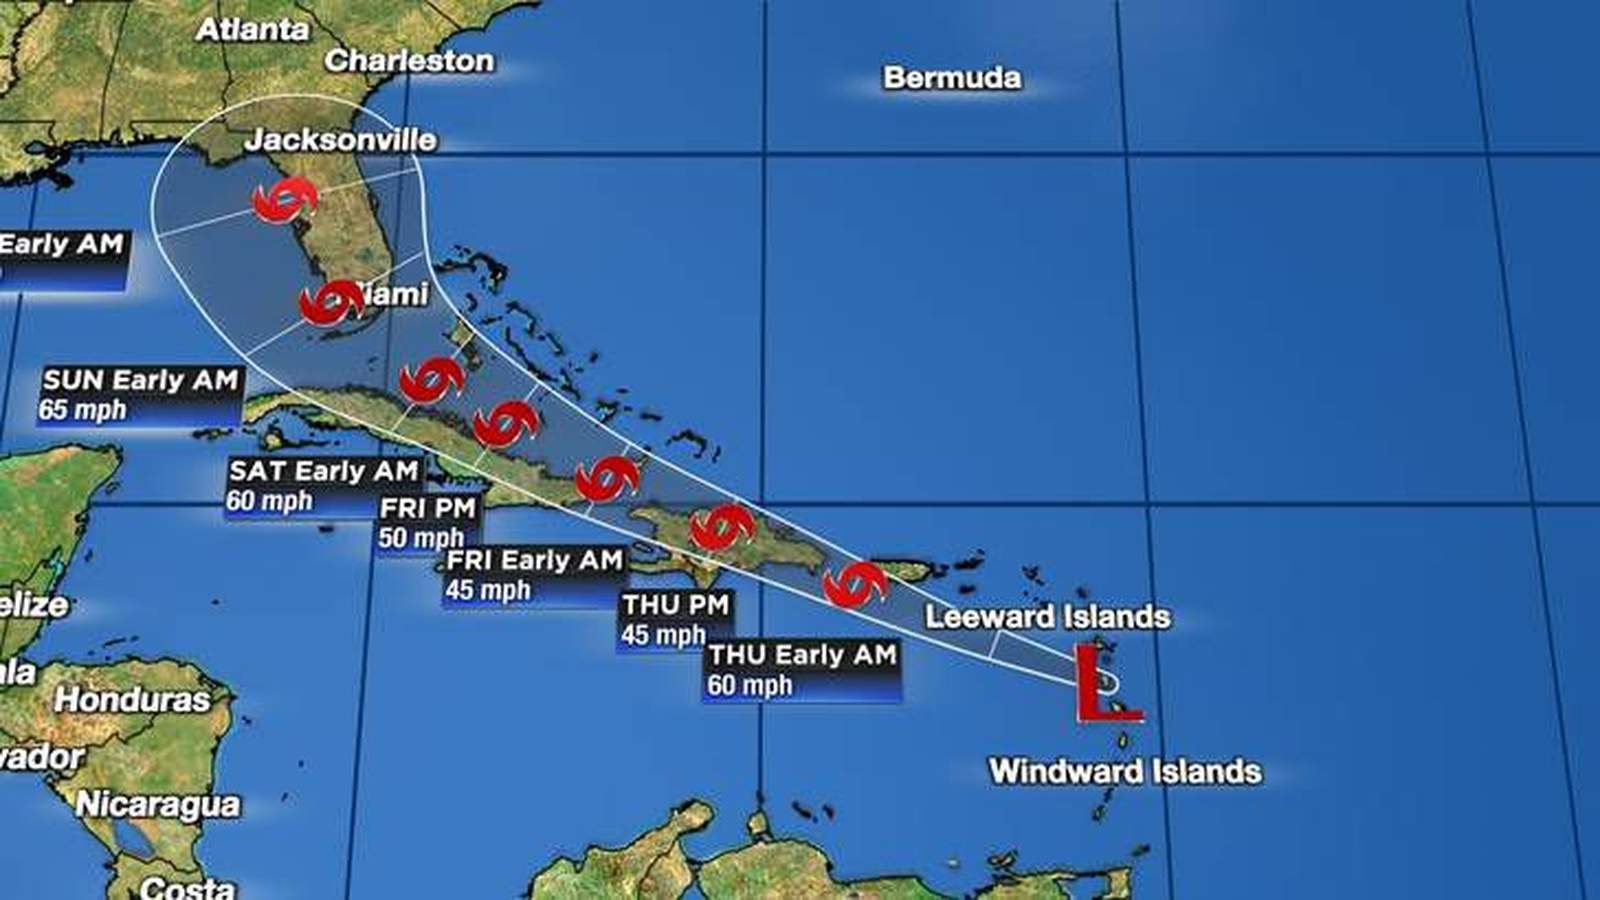 WATCH LIVE: Cone, computer models, updates for system expected to become Isaias on path toward Florida